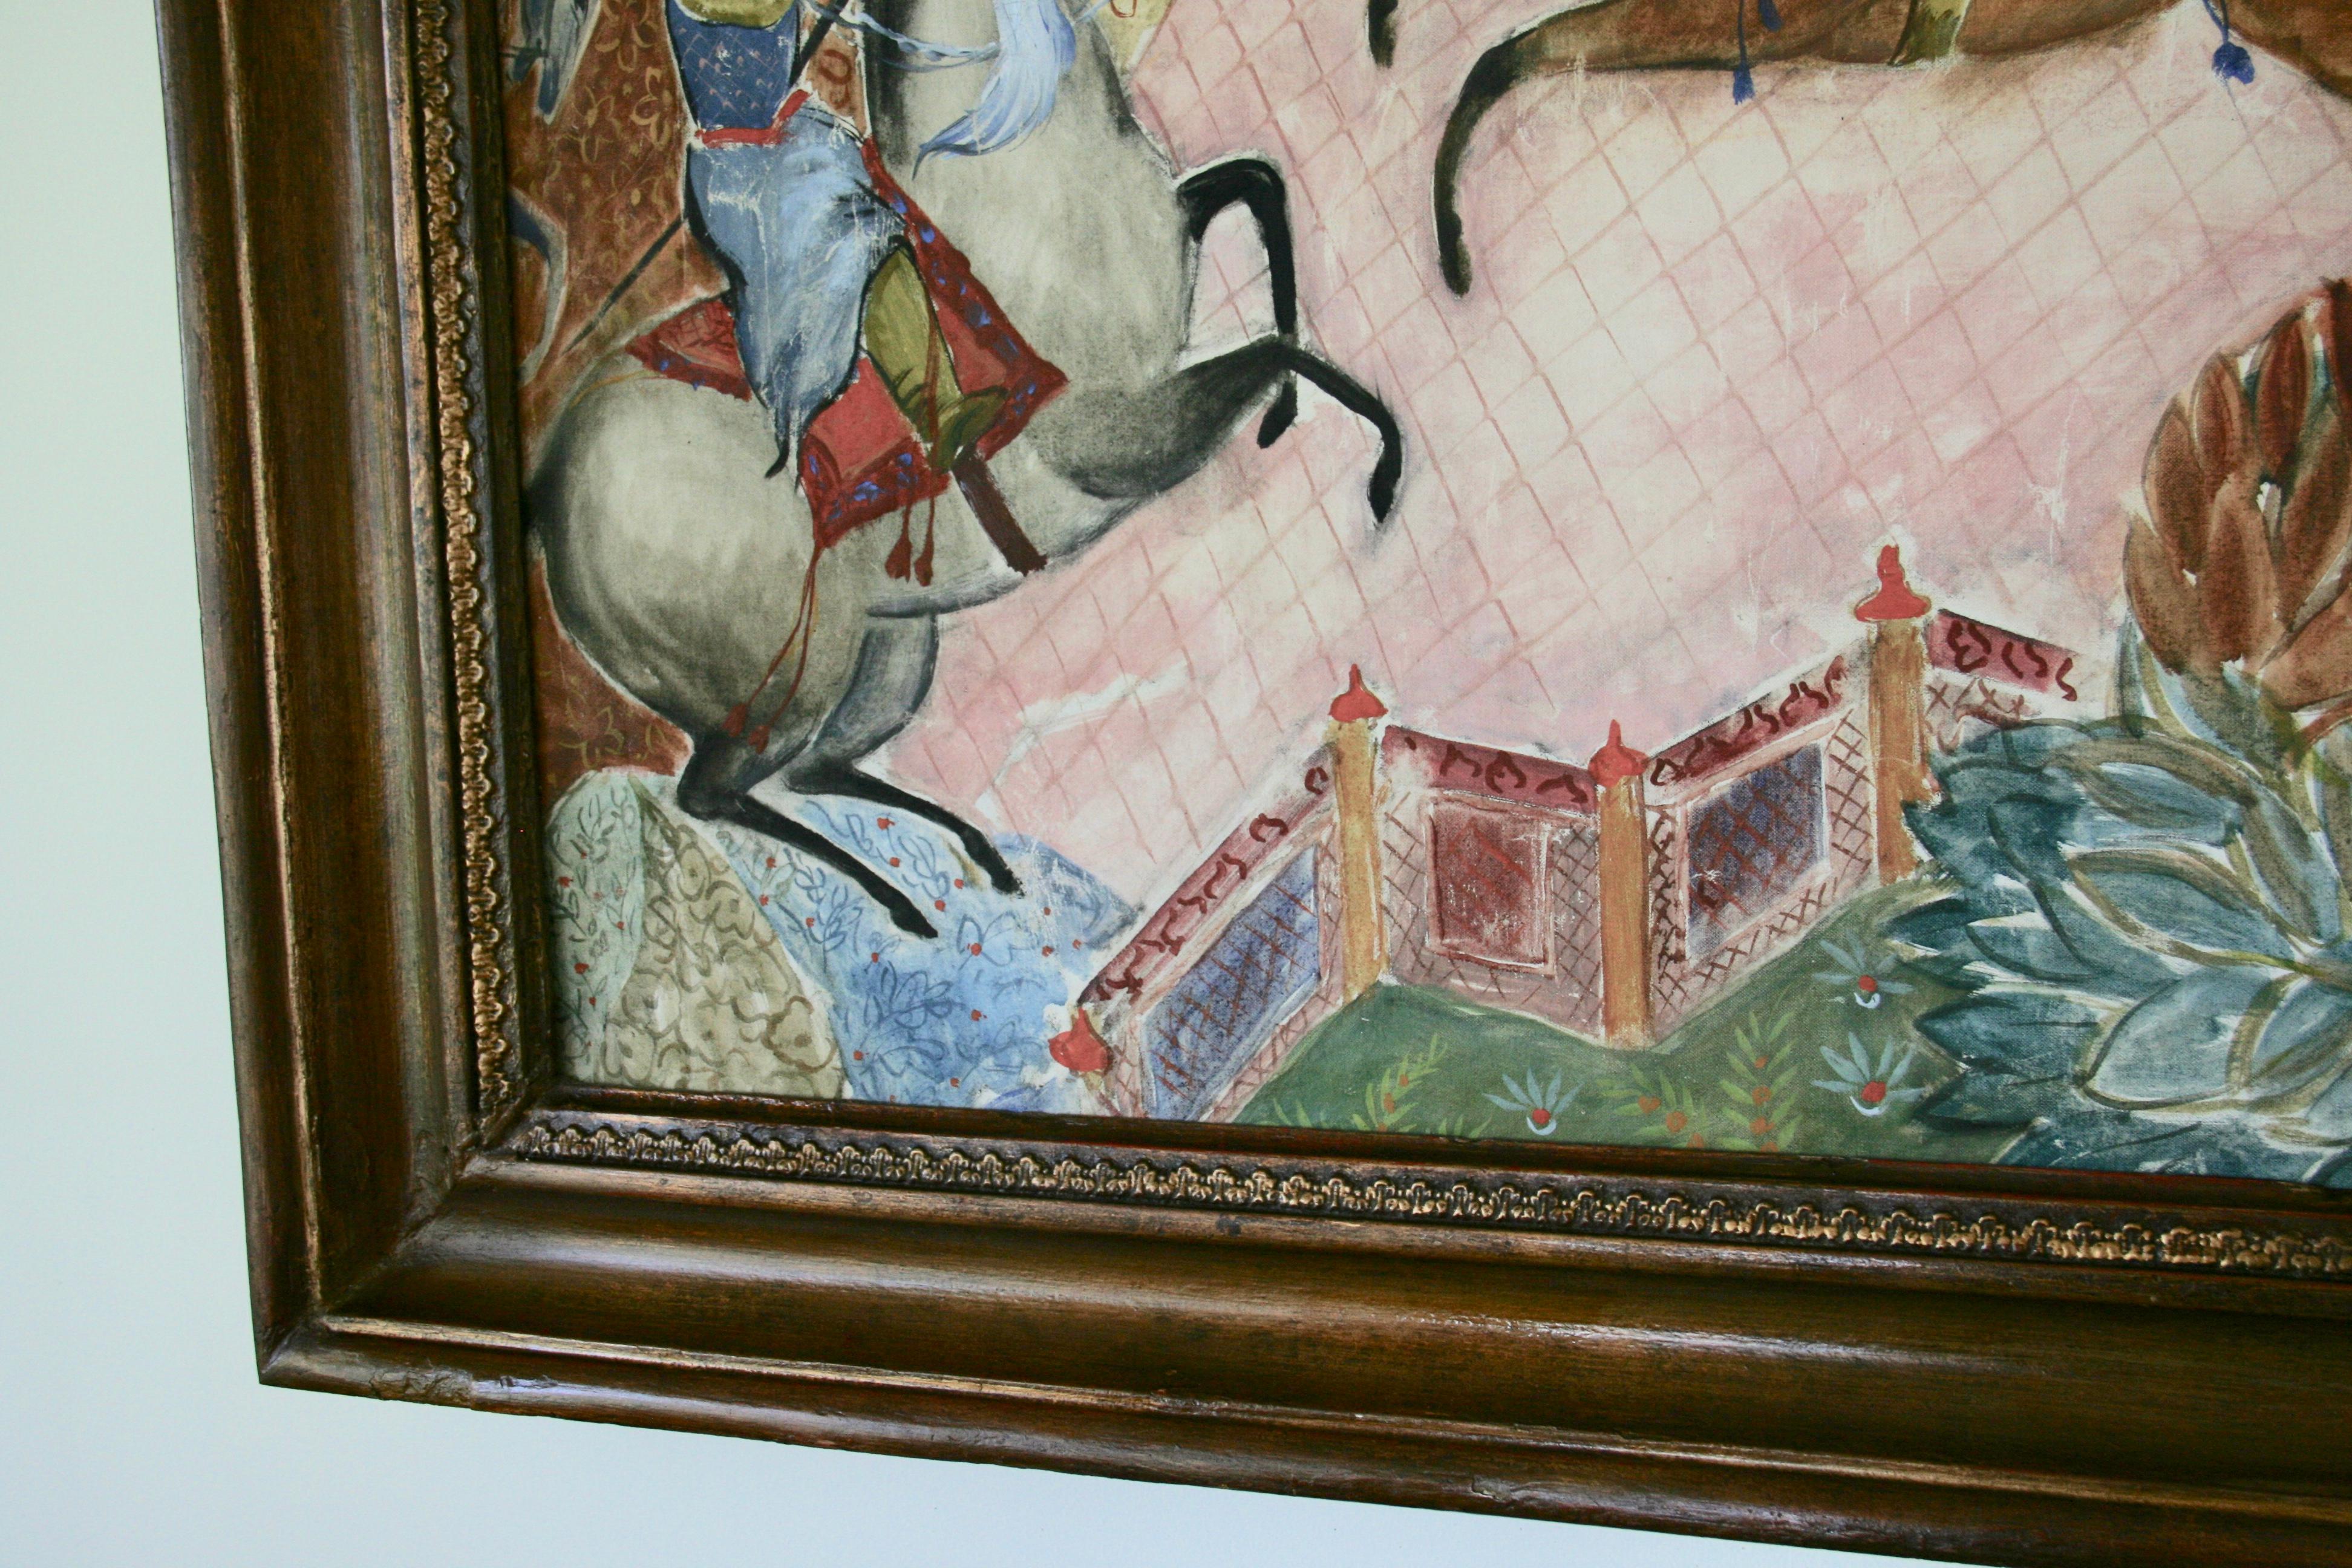 #5-01 Large Scale Persian Hunt, circa 1920's oil painting on canvas depicting hunting scene, displayed in a wood-gesso frame.Image size 39 H X 59.5 W
Artist unknown.
Age wear on the frame, minor losses.